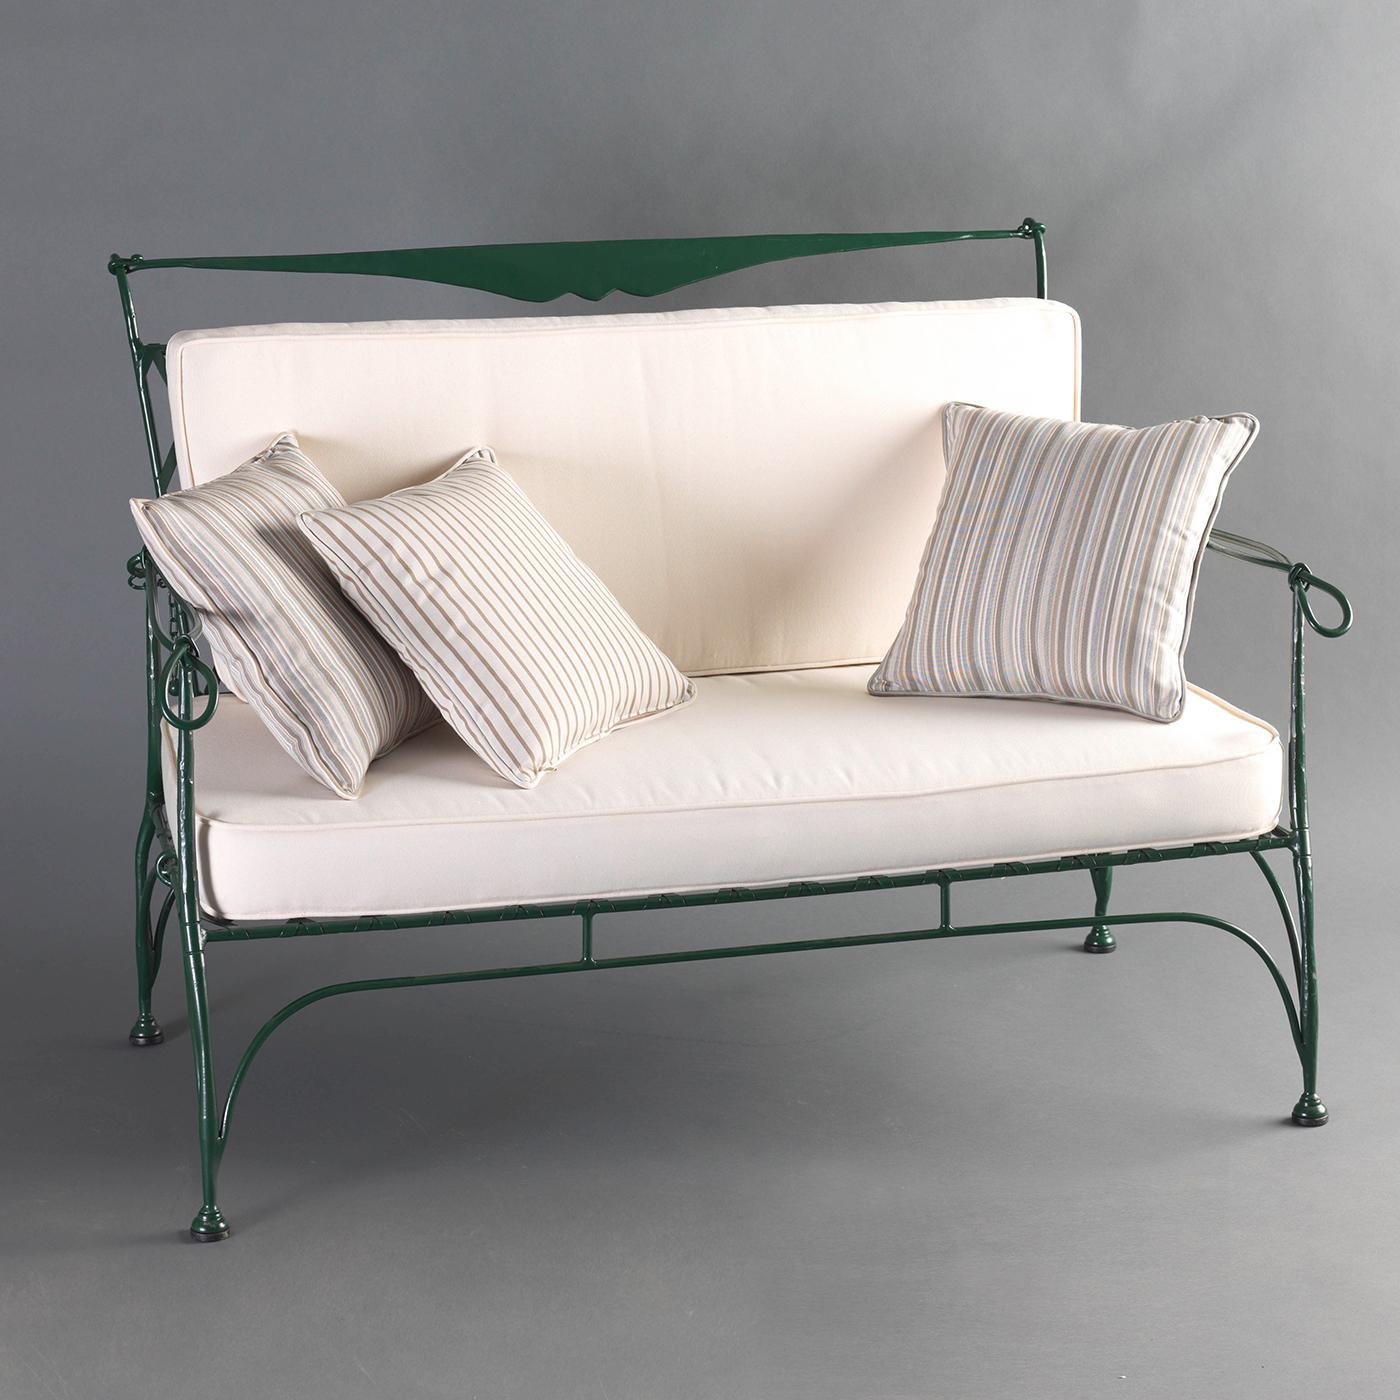 Part of the Florio Collection, this two-seat sofa will make a charming addition to a patio, veranda, or poolside decor. The traditional design is inspired by Tuscan countryside style and rendered in exquisite details by the expert craftsmen at